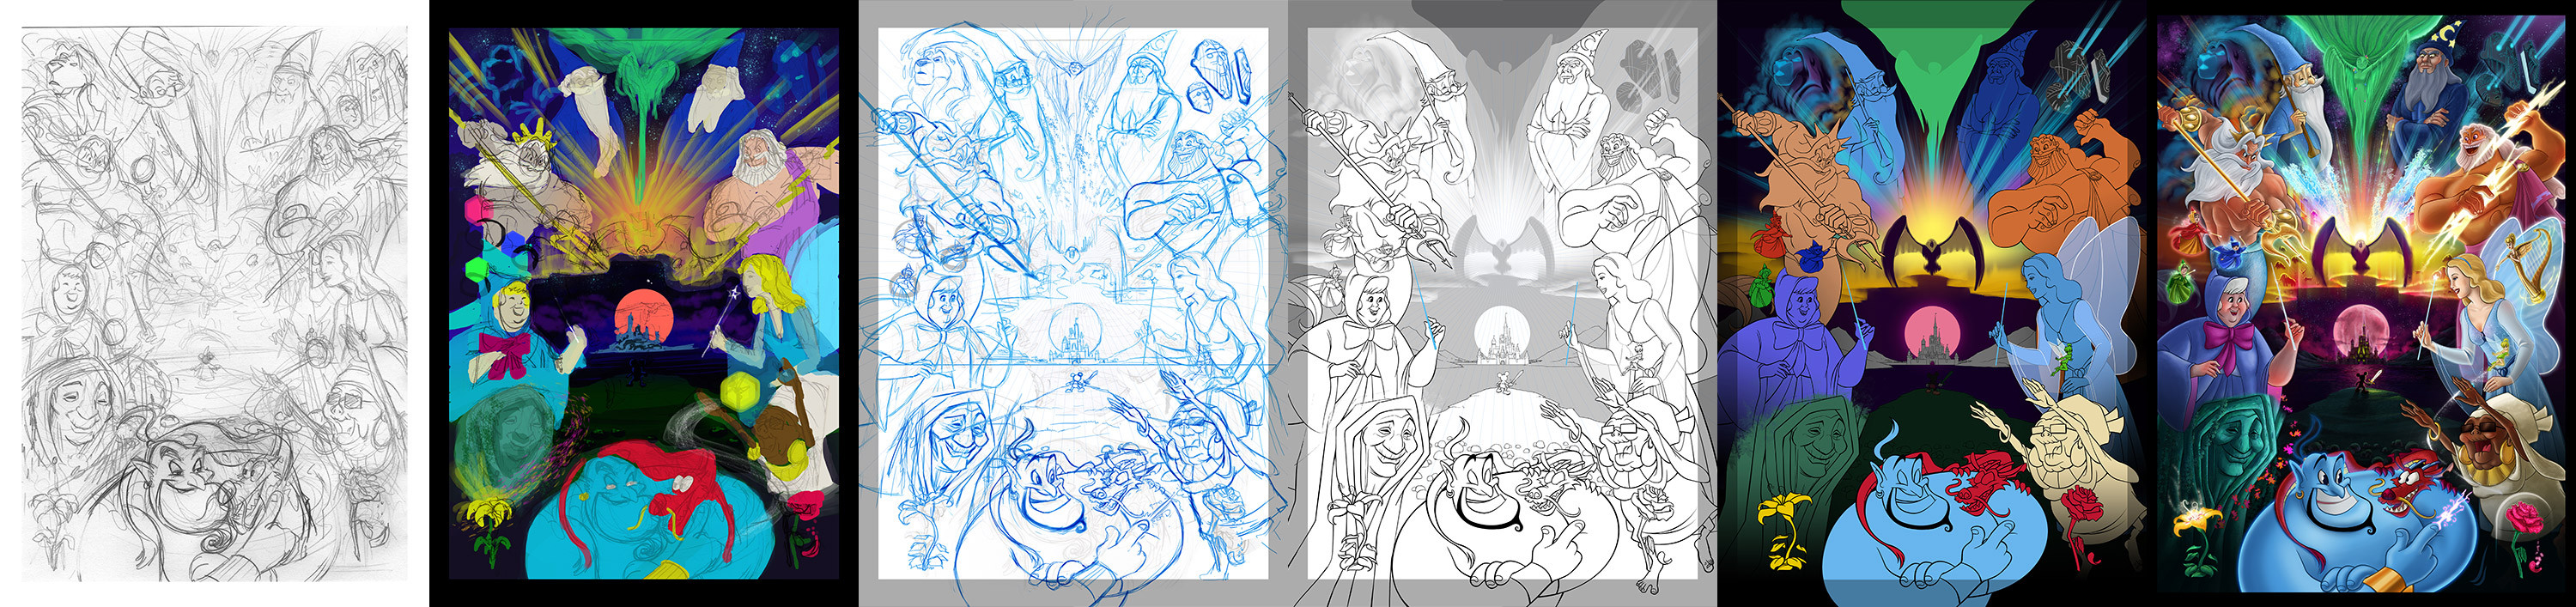 Process from rough sketch to color block to inking.